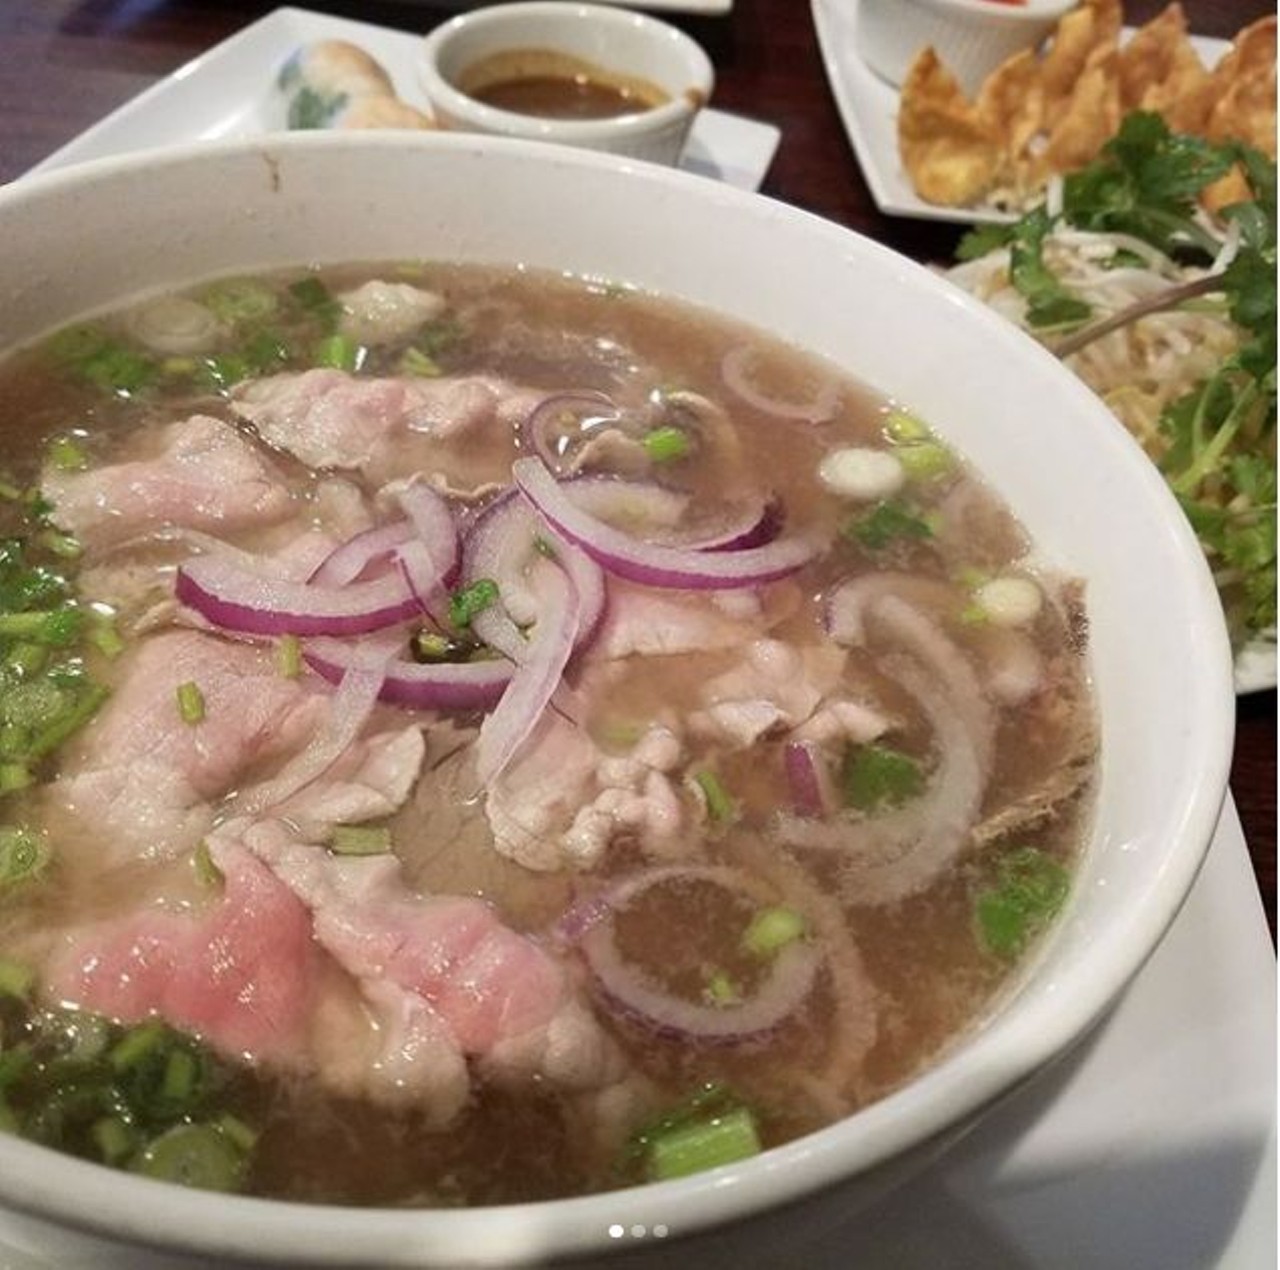 Pho Kim Long
4230 McCullough Ave., (210) 829-8021
Get the giggles out of the way before you head to Pho Kim Long. The joint carries pho favorites in massive bowls, vermicelli bun and Vietnamese sandwiches on soft bollilos. The lunch game is on-pointe. 
Photo via Instagram,  annahoangvu